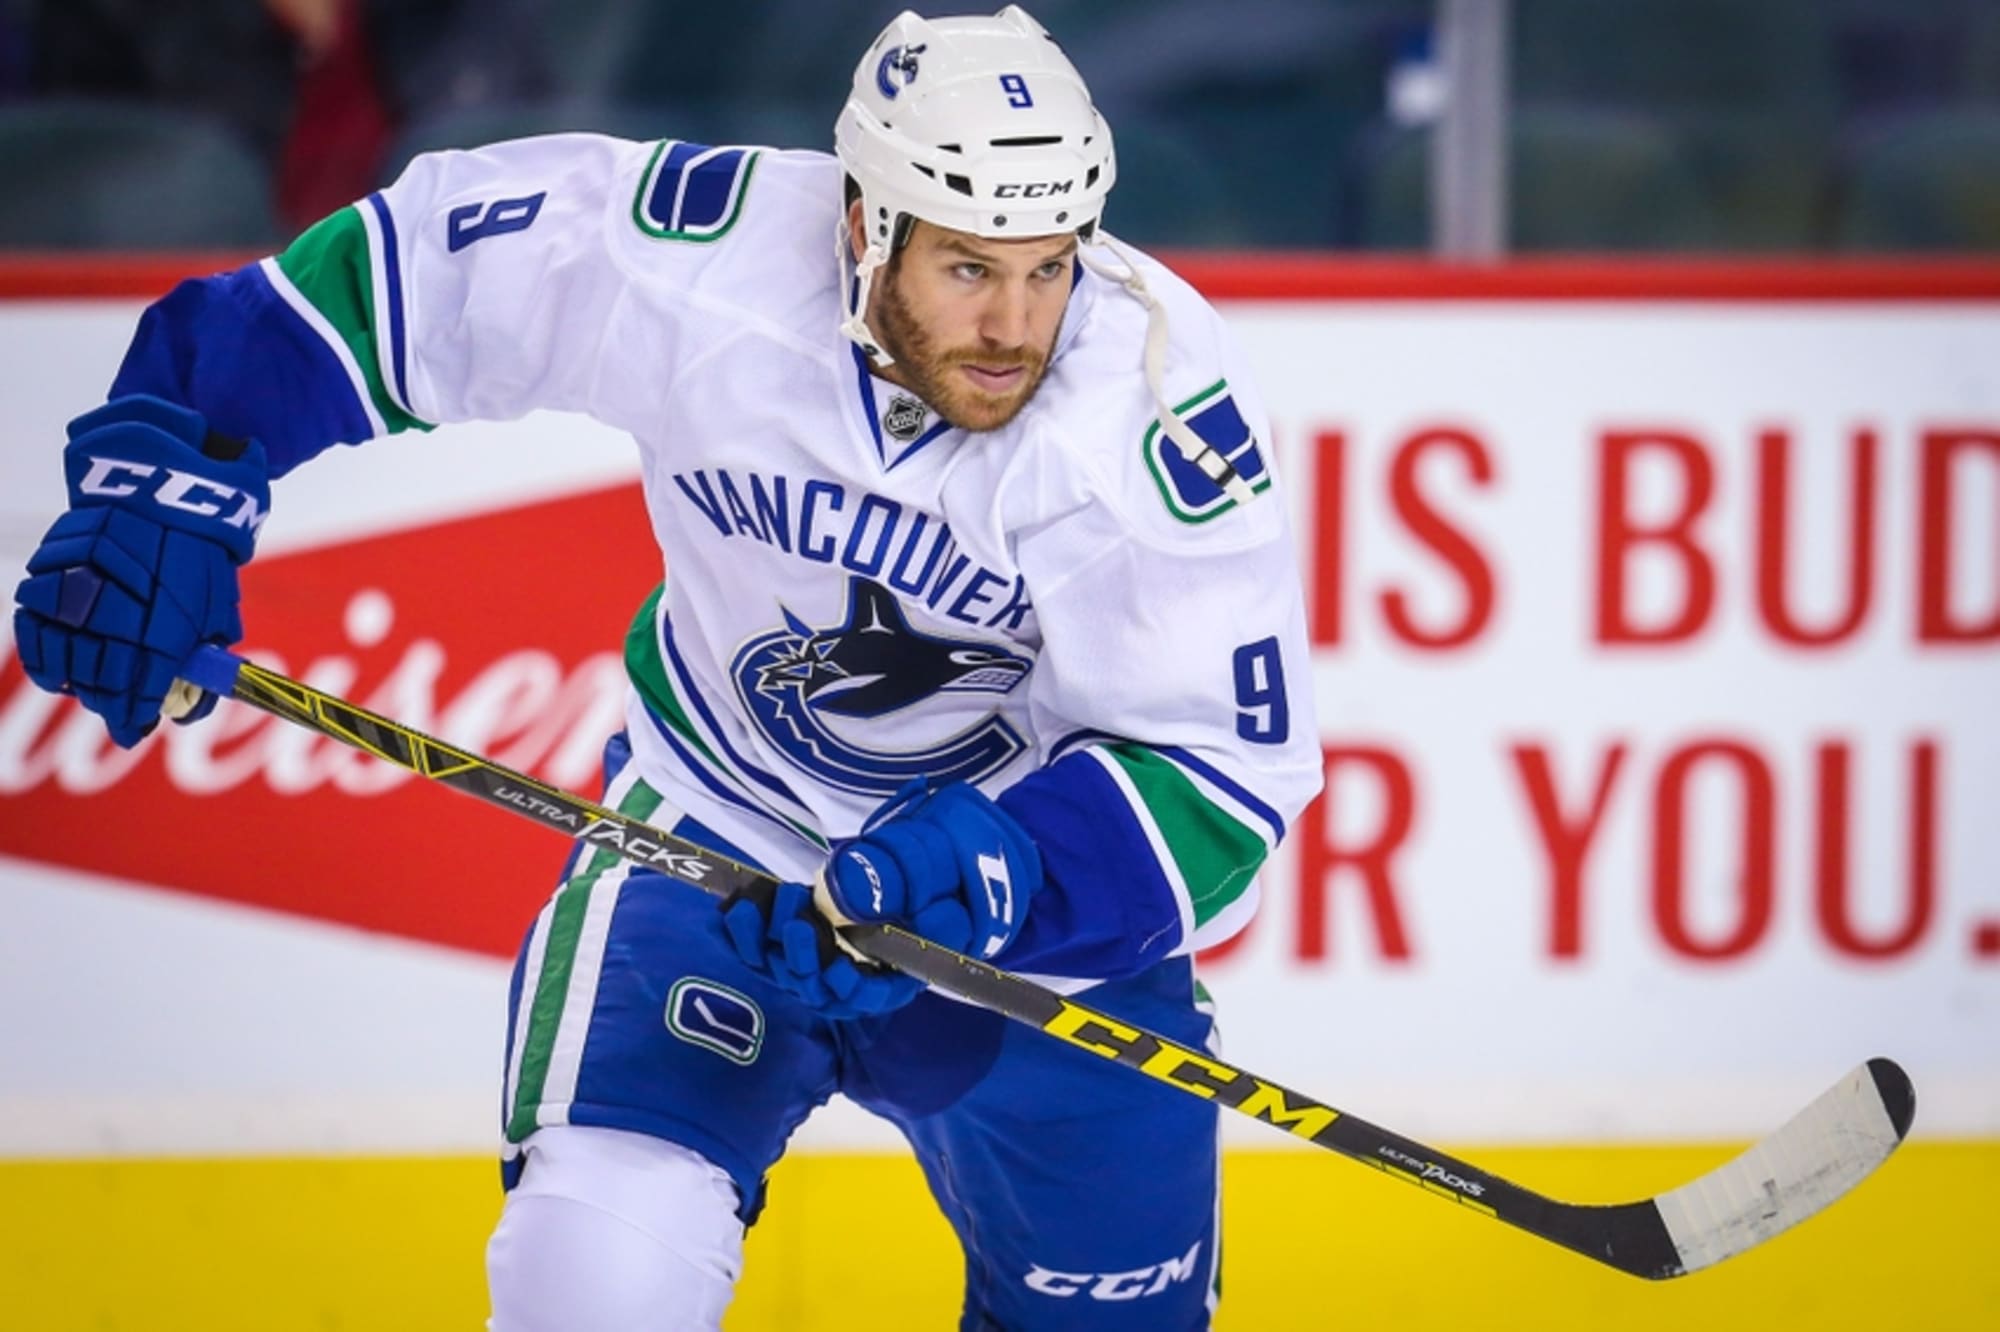 Vancouver Canucks: Brandon Prust is Still an Option - Page 4